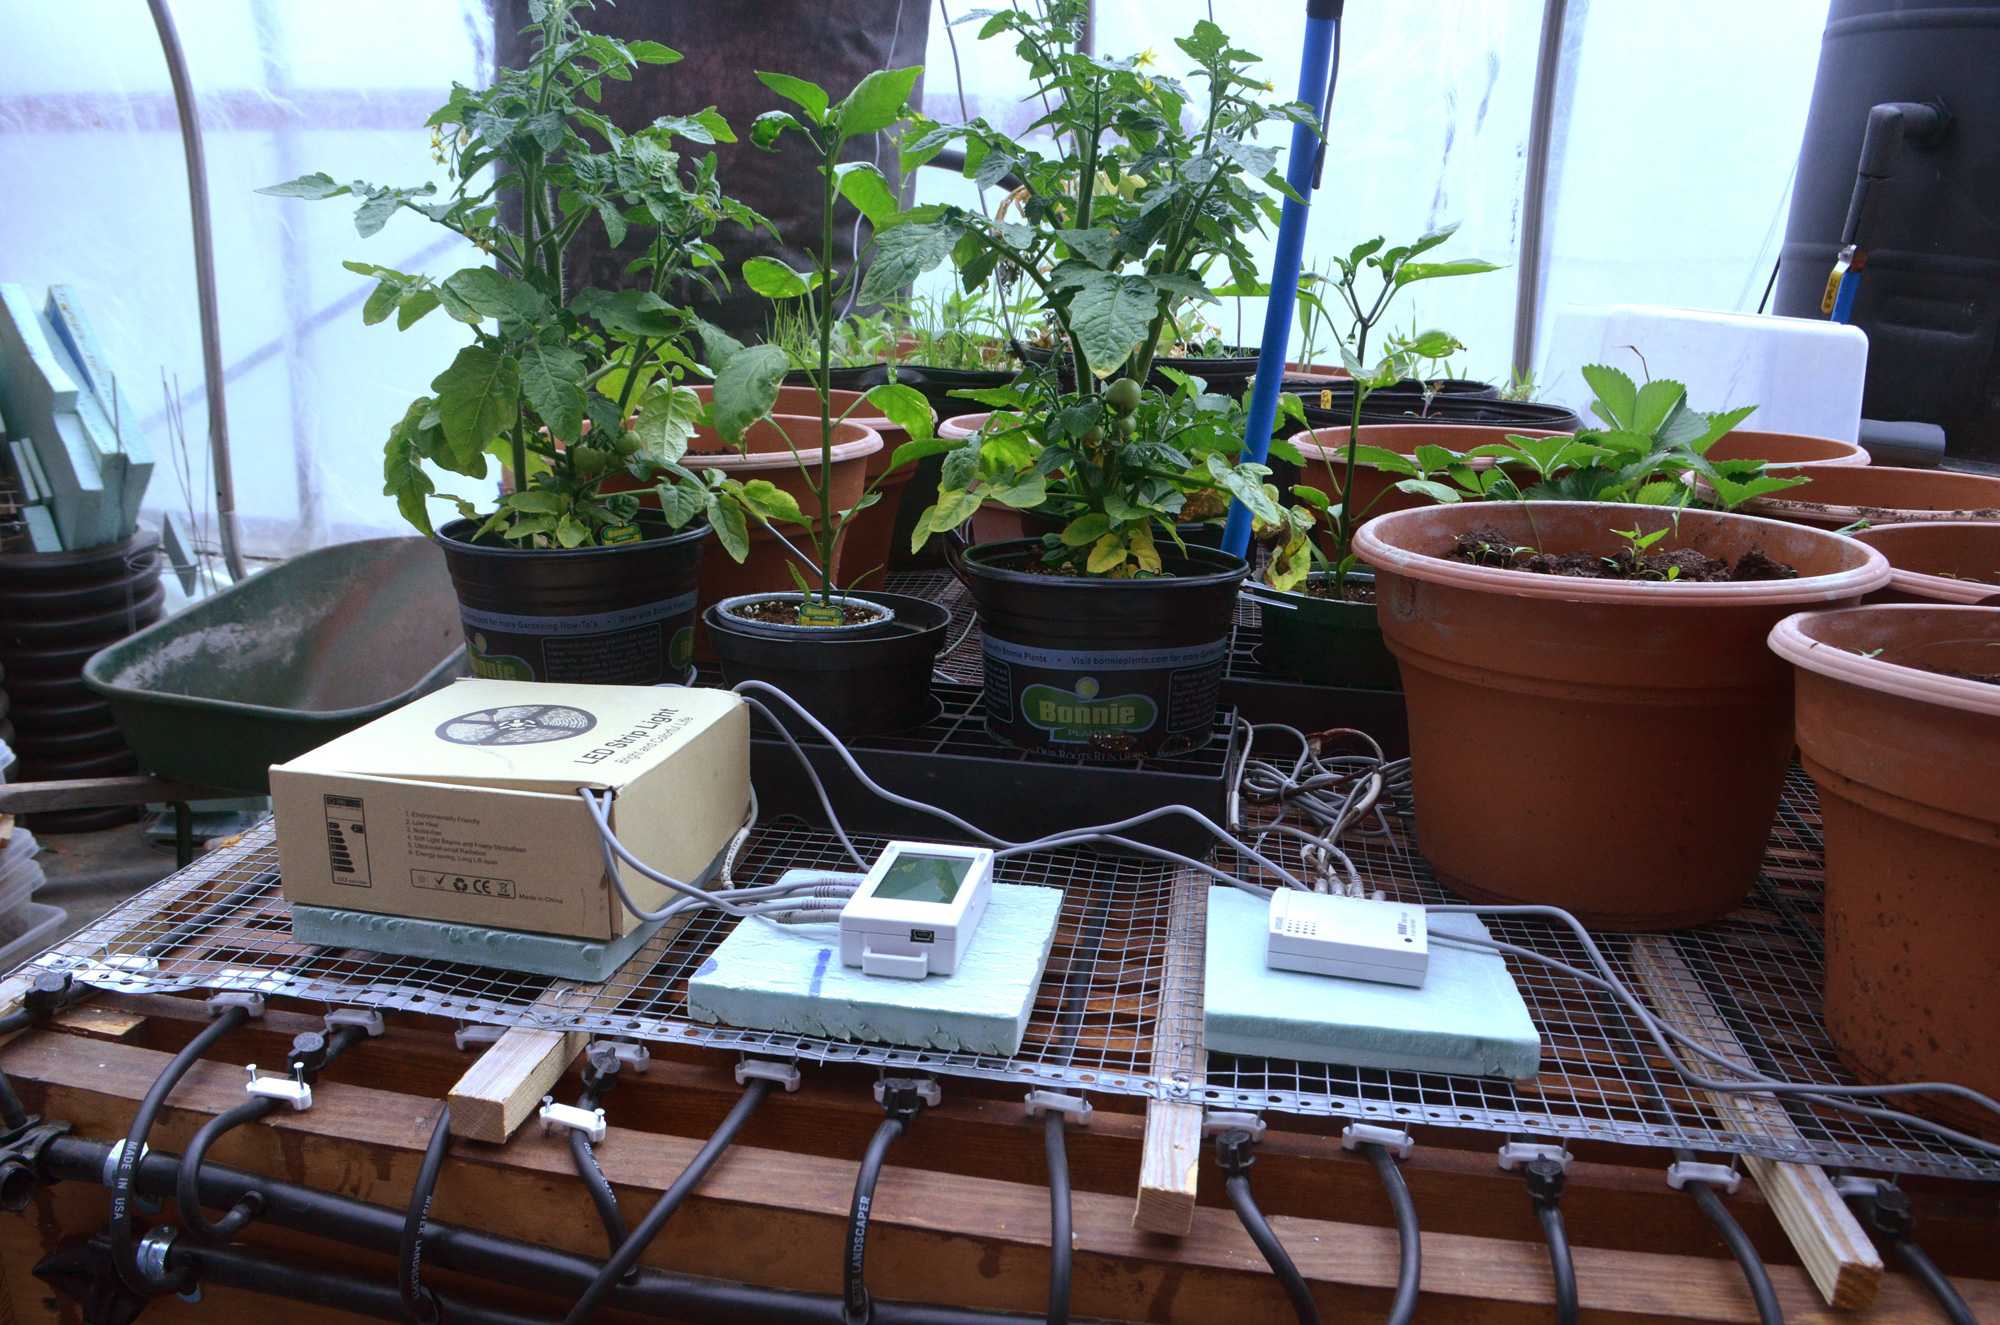 These devices are designed to measure plant growth. Data collected is used to determine the best conditions for growing plants during the winter months.